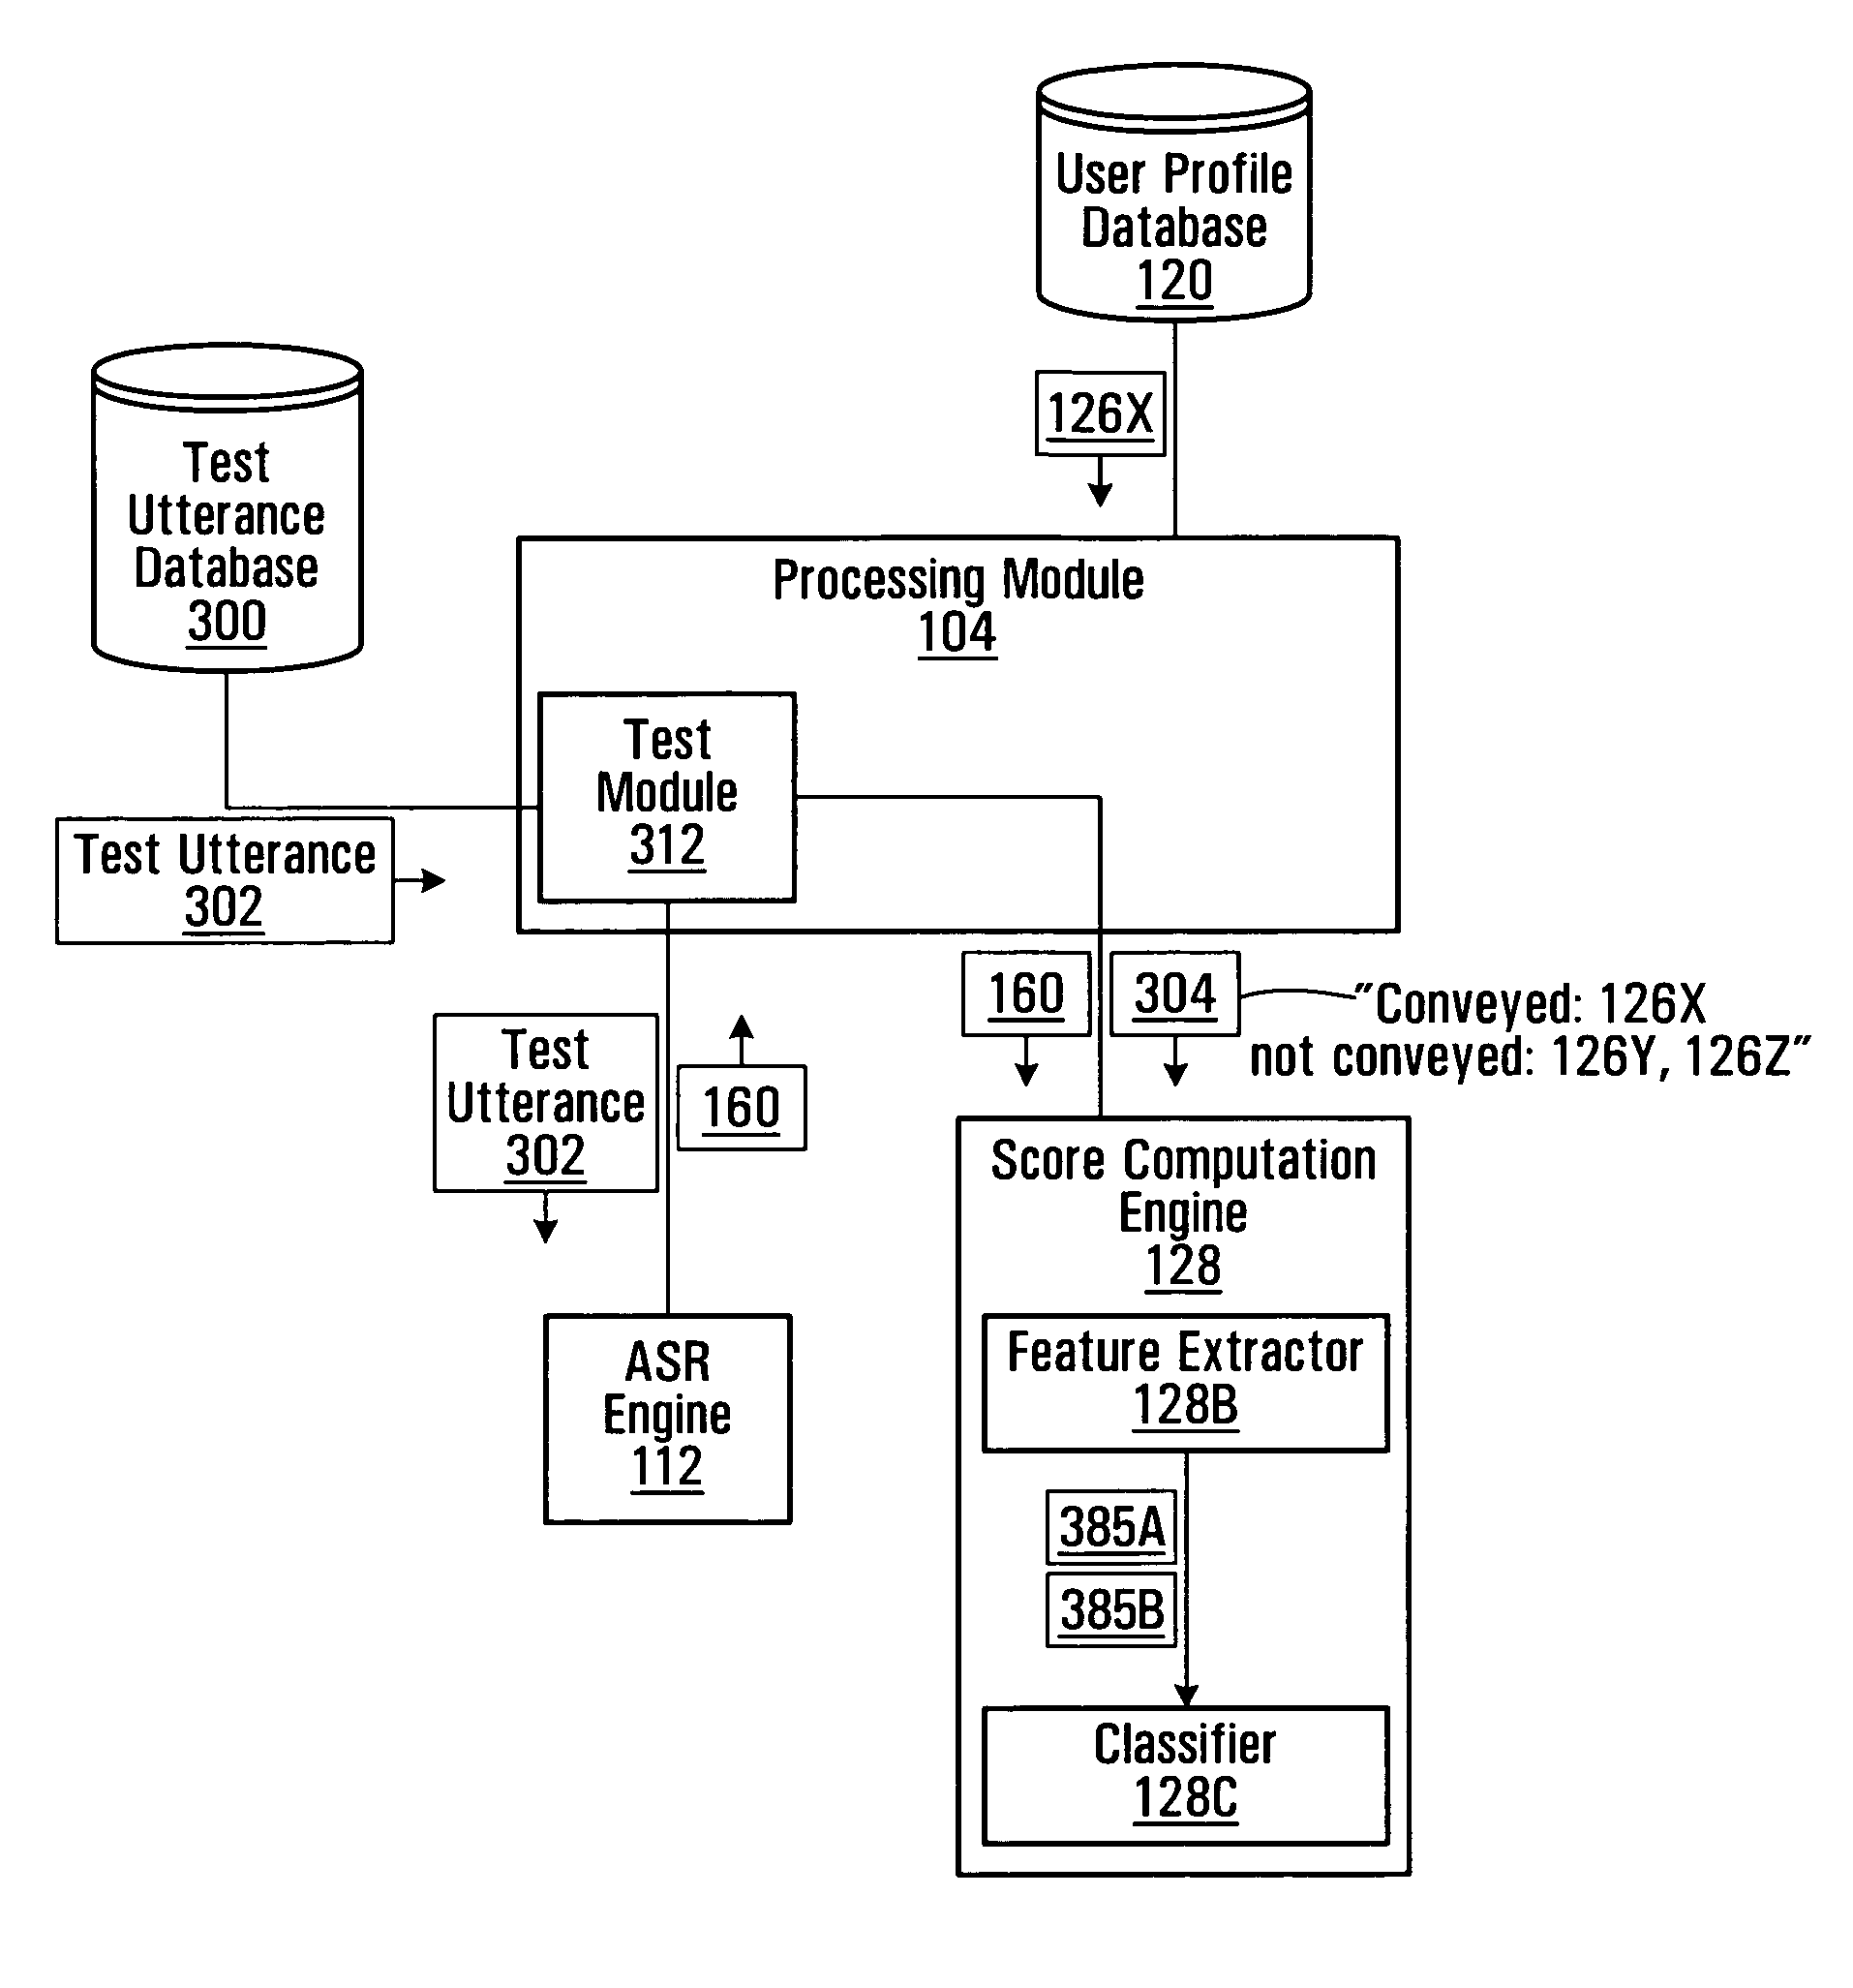 Method and system for user authentication based on speech recognition and knowledge questions